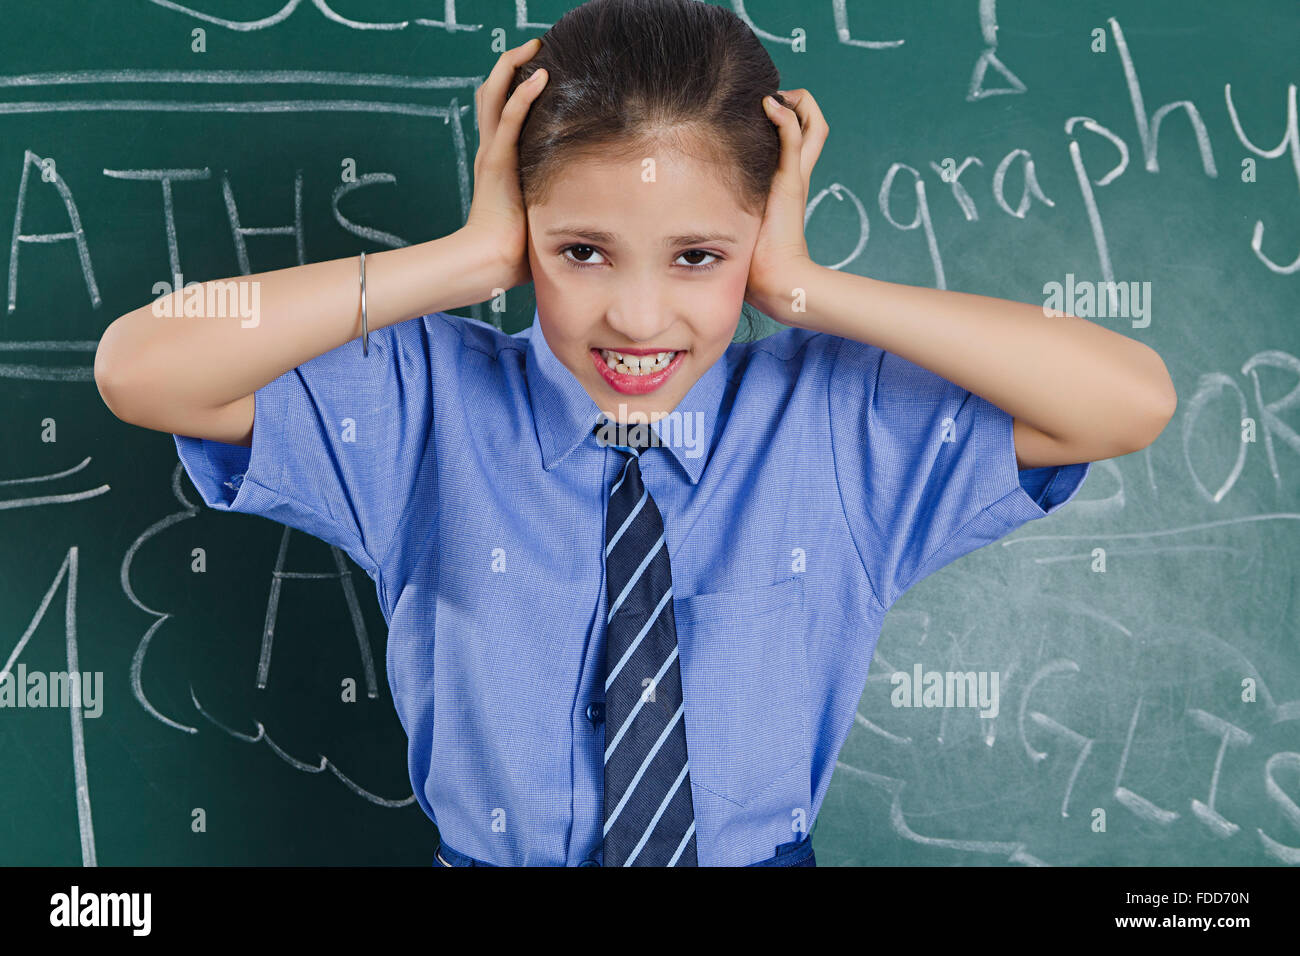 1 Child Girl School Student Classroom Rejection Covering Ear Stock Photo